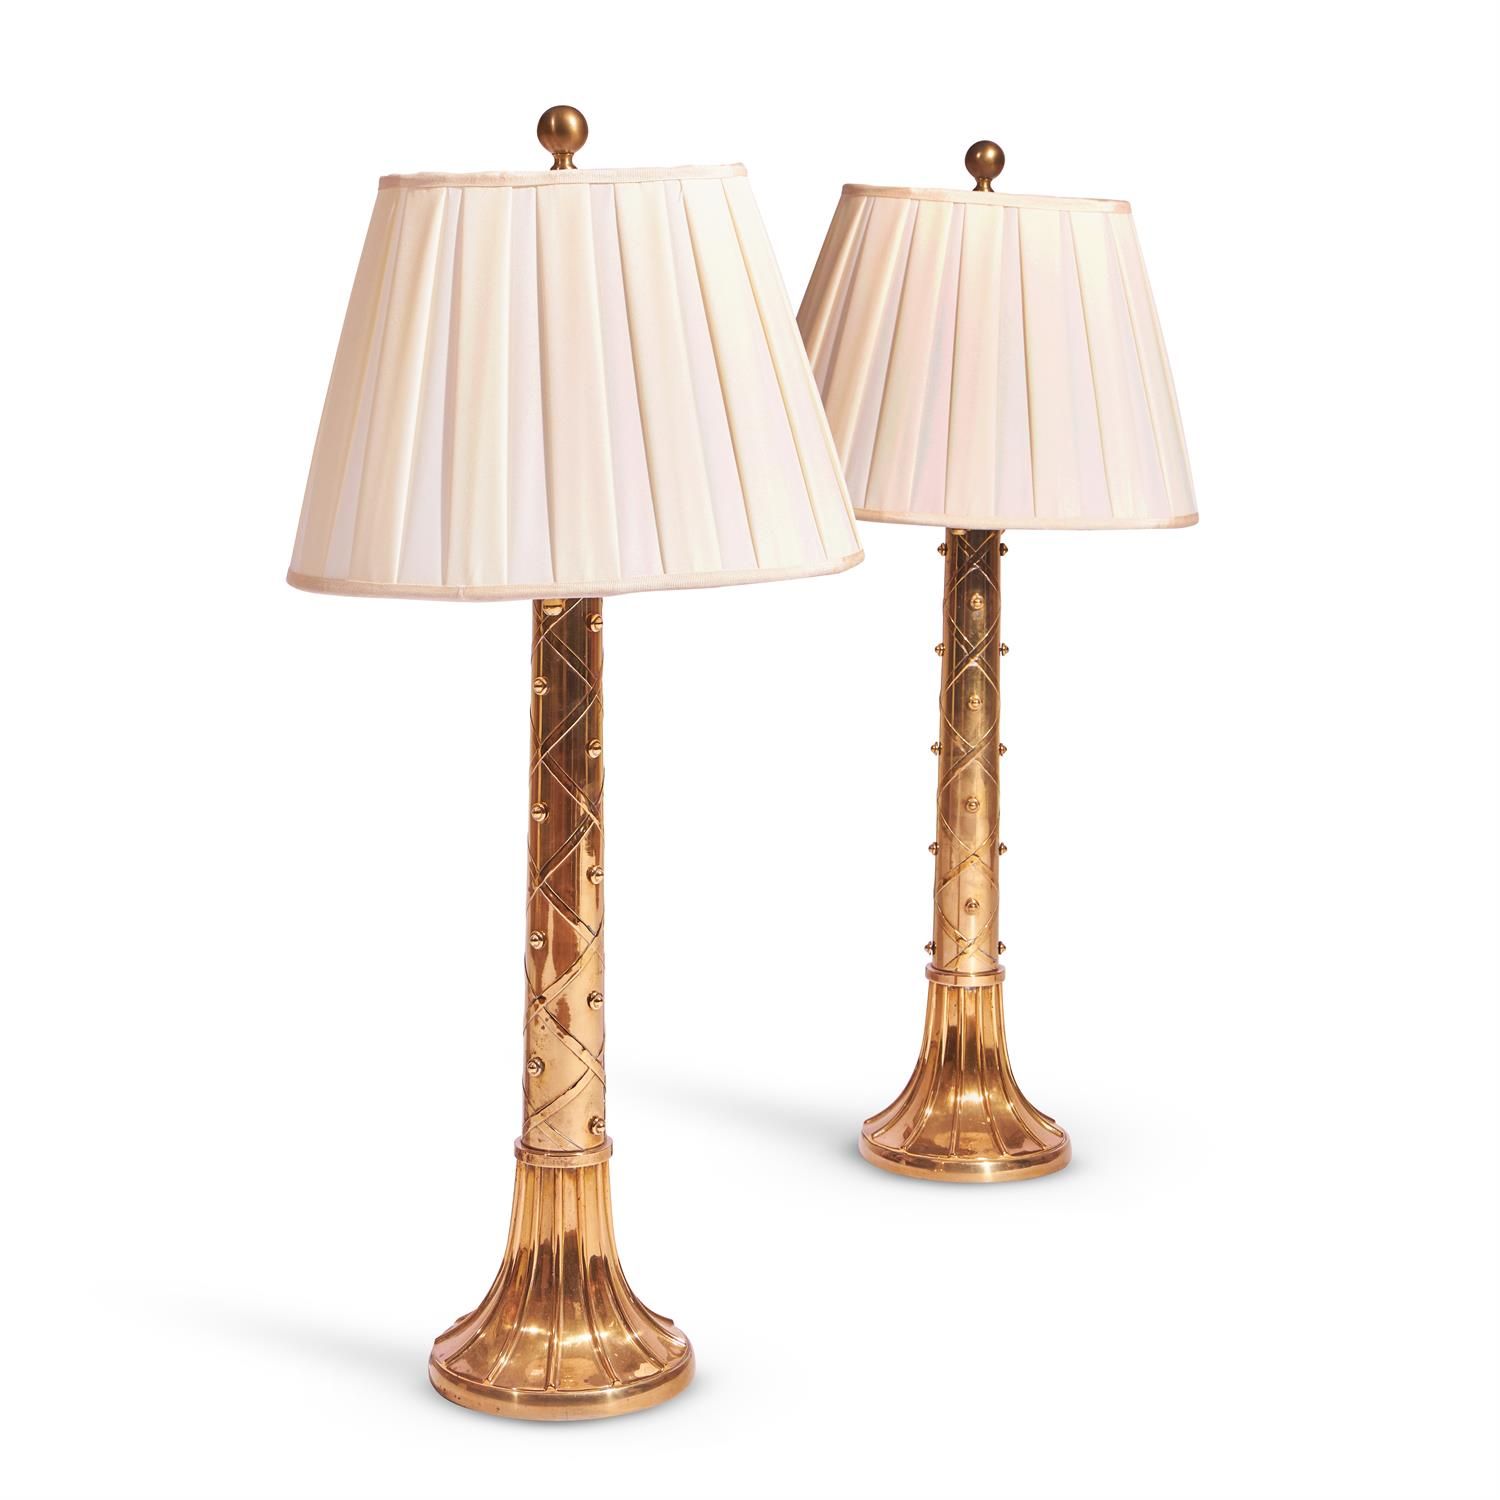 A PAIR OF AMERICAN GILT BRASS LAMPS BY LEO DESIGN PITTSBURG PAIRE DE LAMPES AMÉR&hellip;